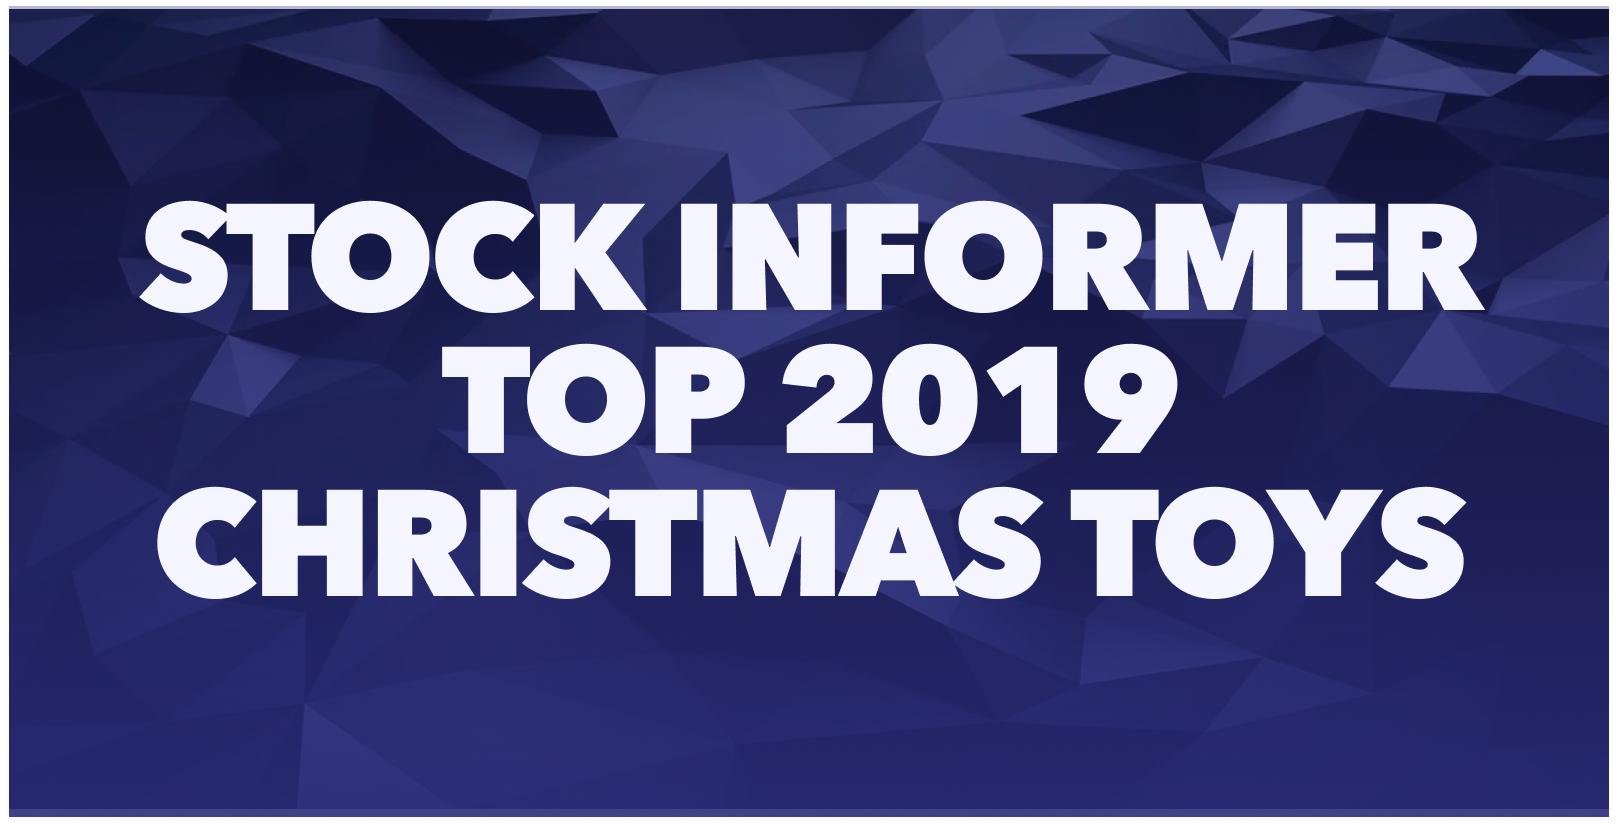 Stock Informer Top 2019 Christmas Toys Graphic